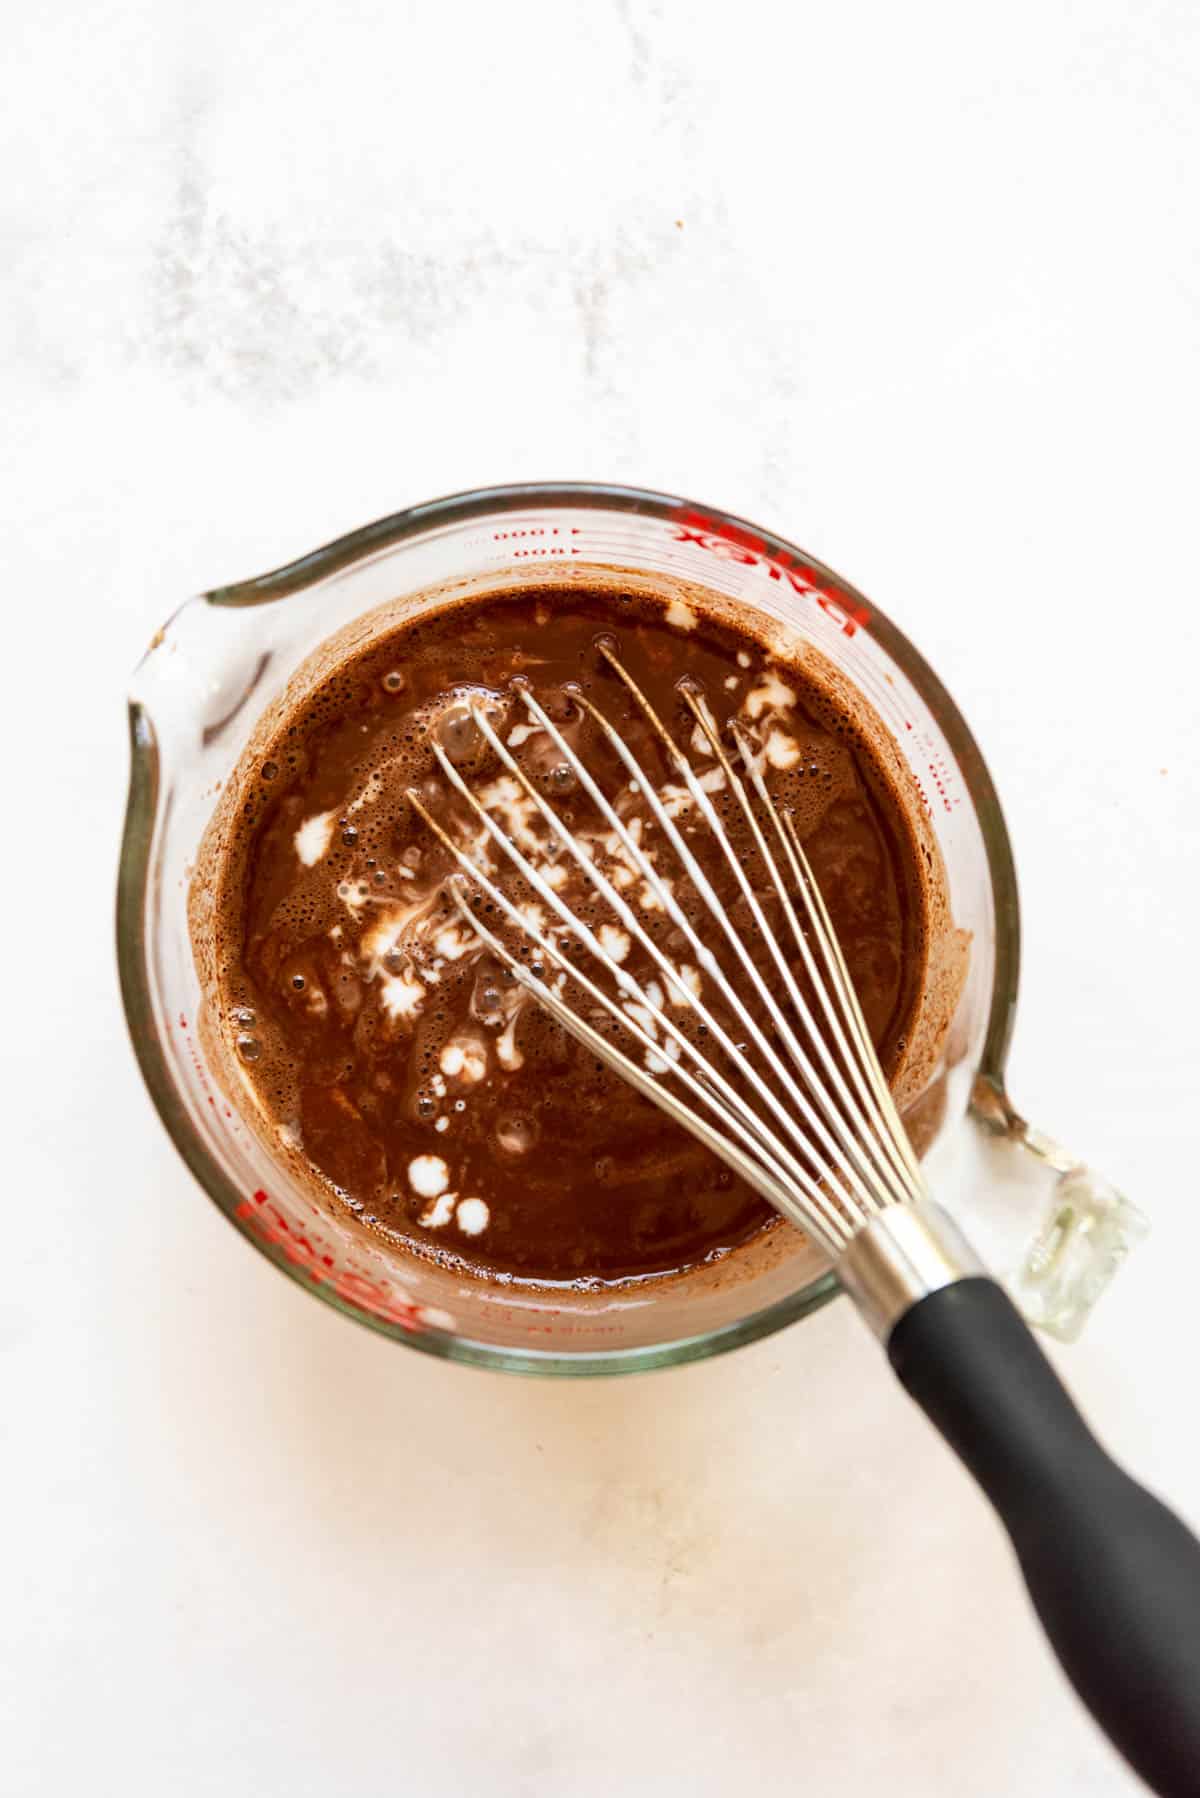 Top view of a glass measuring jug with a cocoa powder mixture, with powdered sugar and a whisk in it.